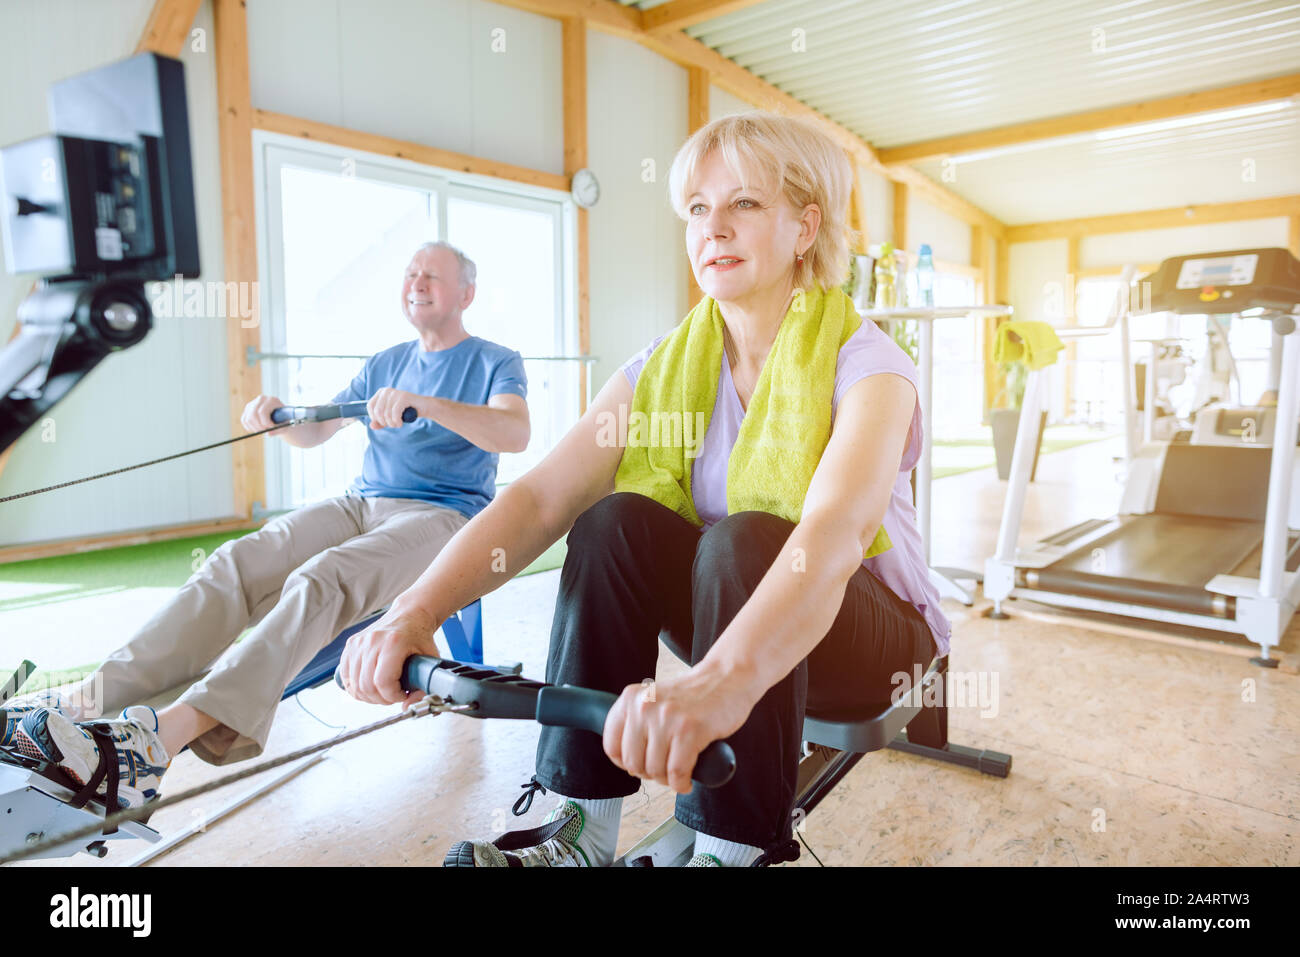 Senior couple in the gym on a rowing machine Stock Photo